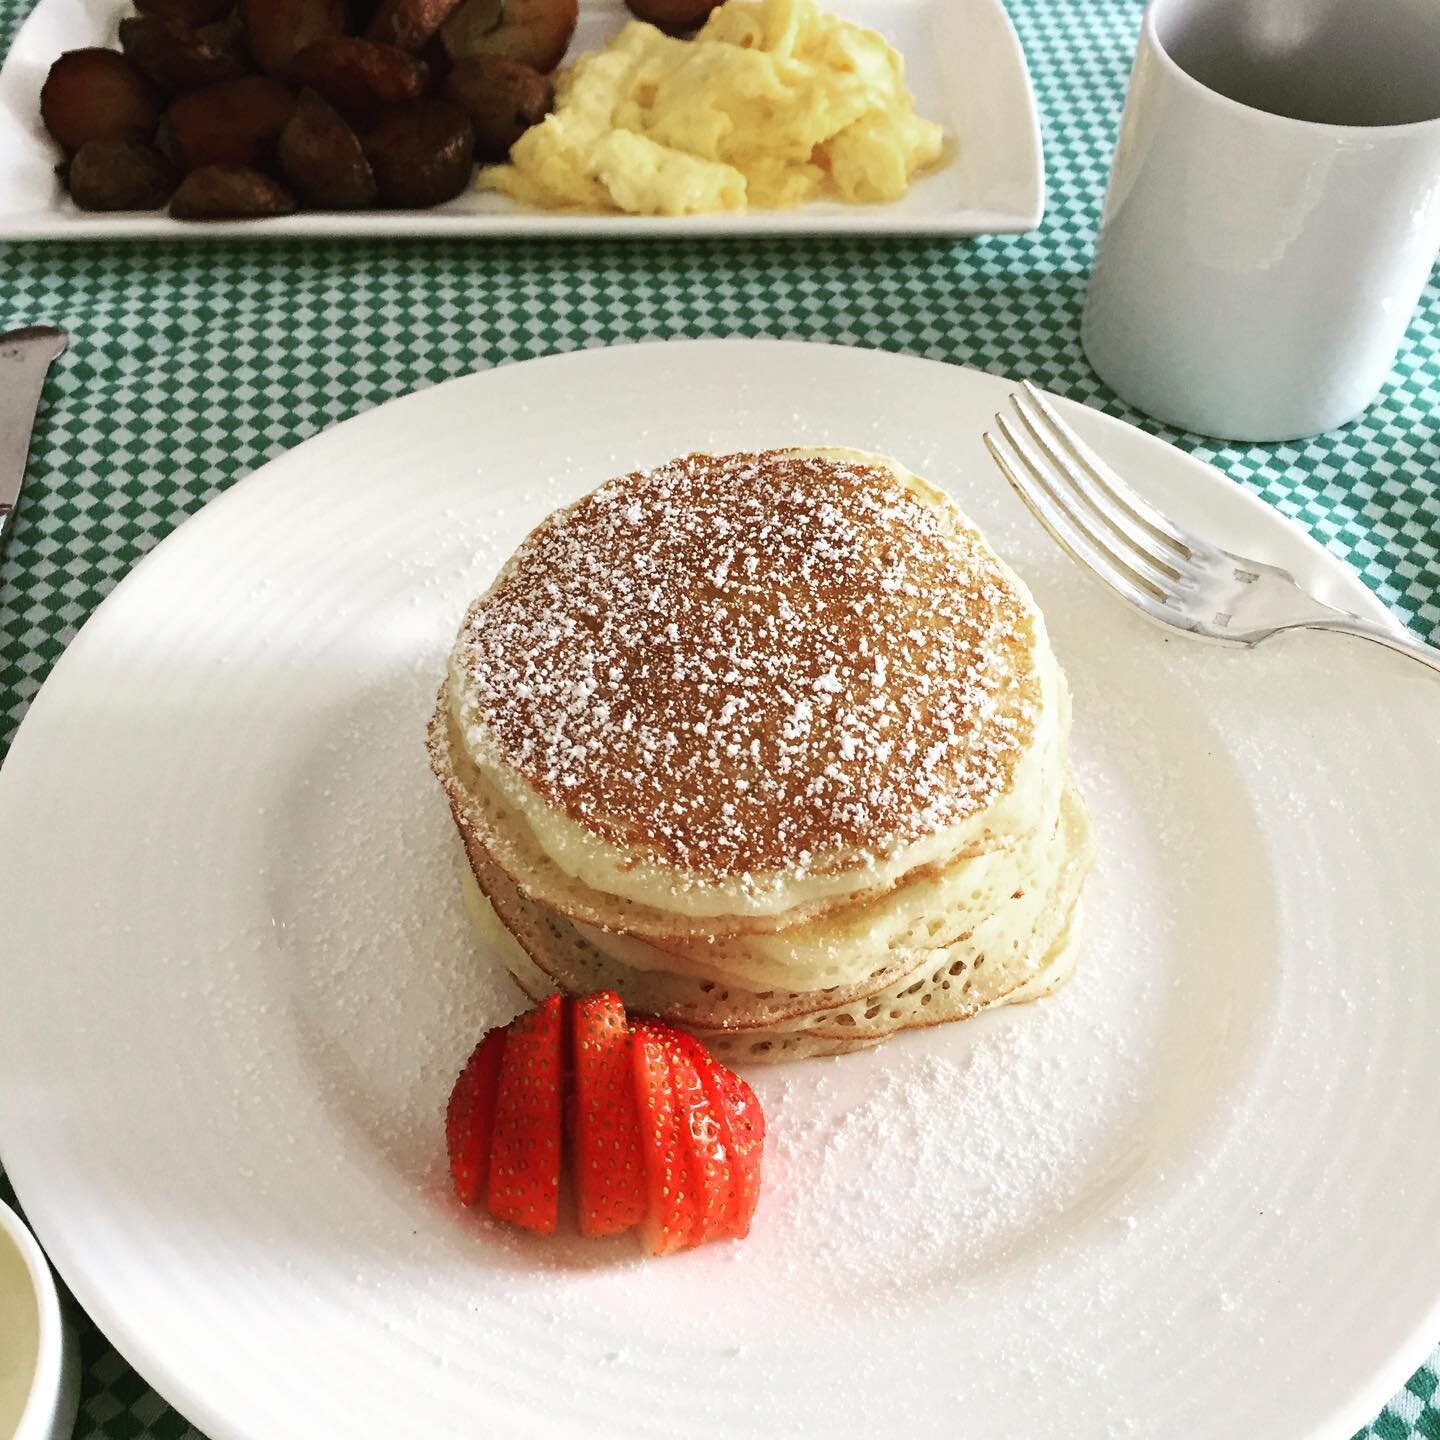 Don&rsquo;t forget to host a breakfast the day after your wedding for out of town guests. Bonus points if you have pancakes!